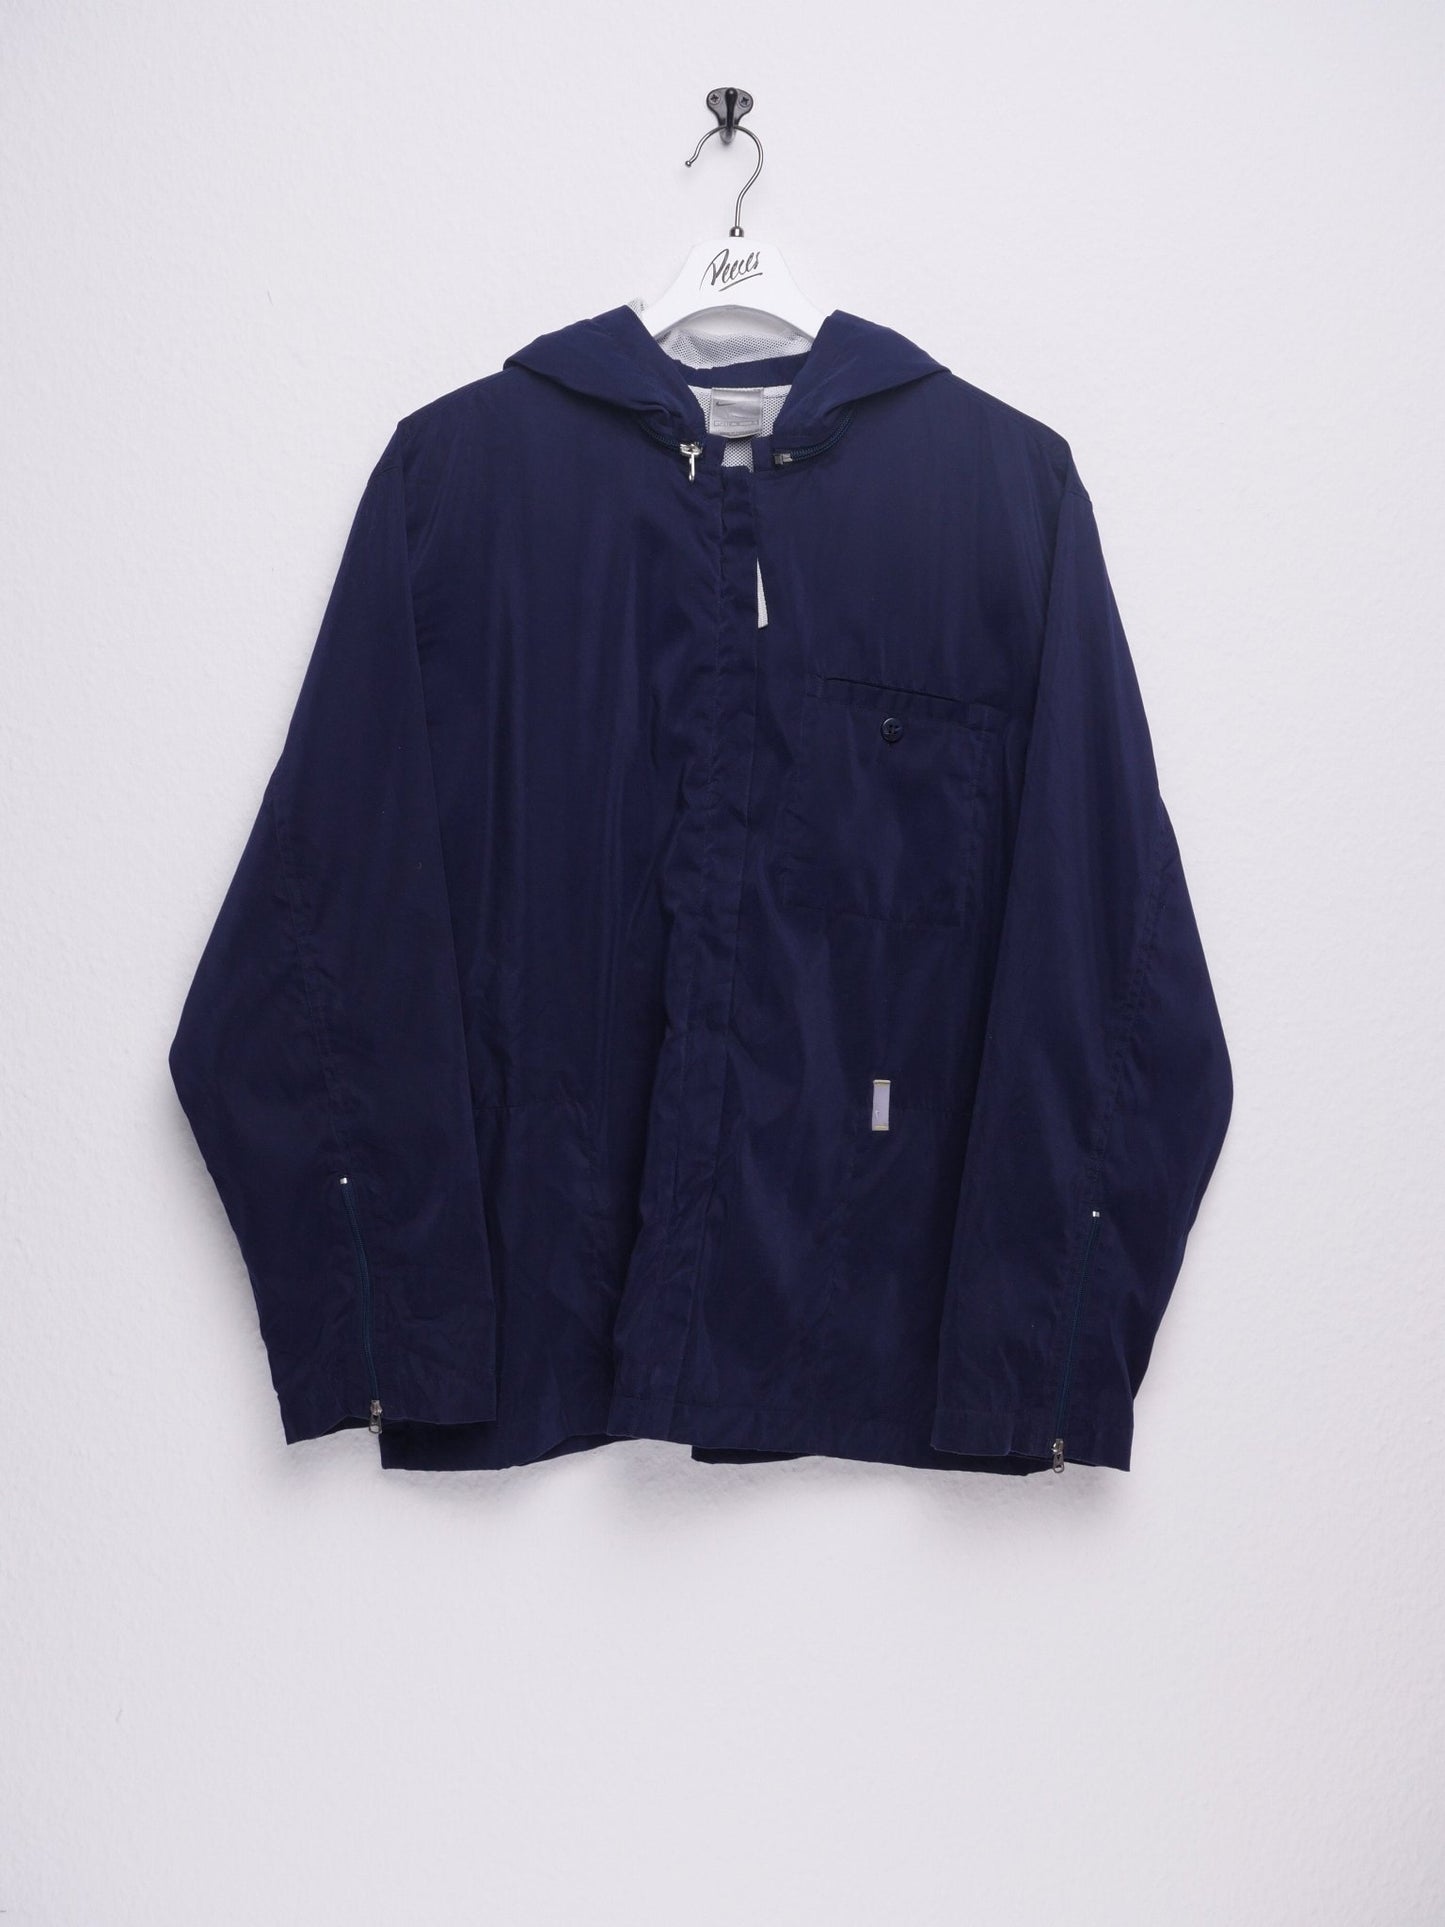 Nike embroidered Patch darkblue Jacket - Peeces